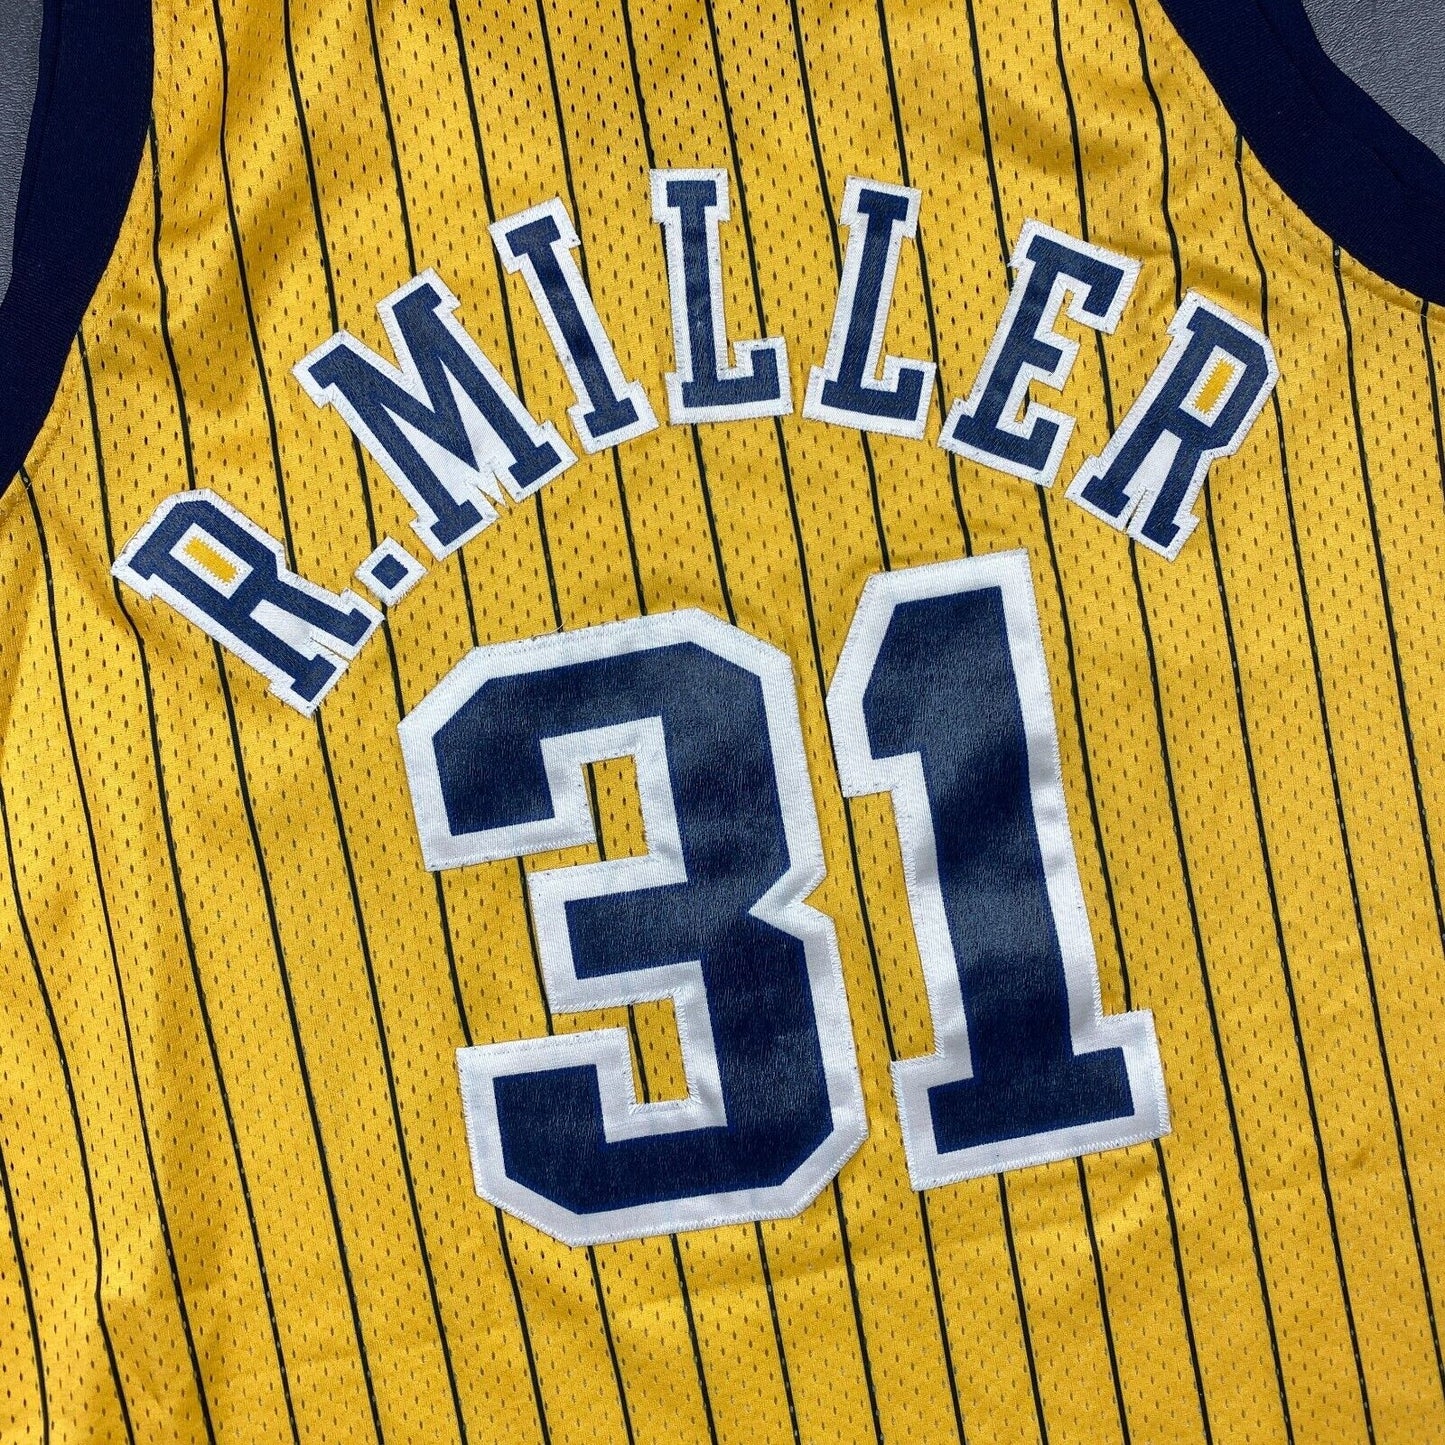 100% Authentic Reggie Miller Vintage Nike Indiana Pacers Jersey Size 2XL Mens